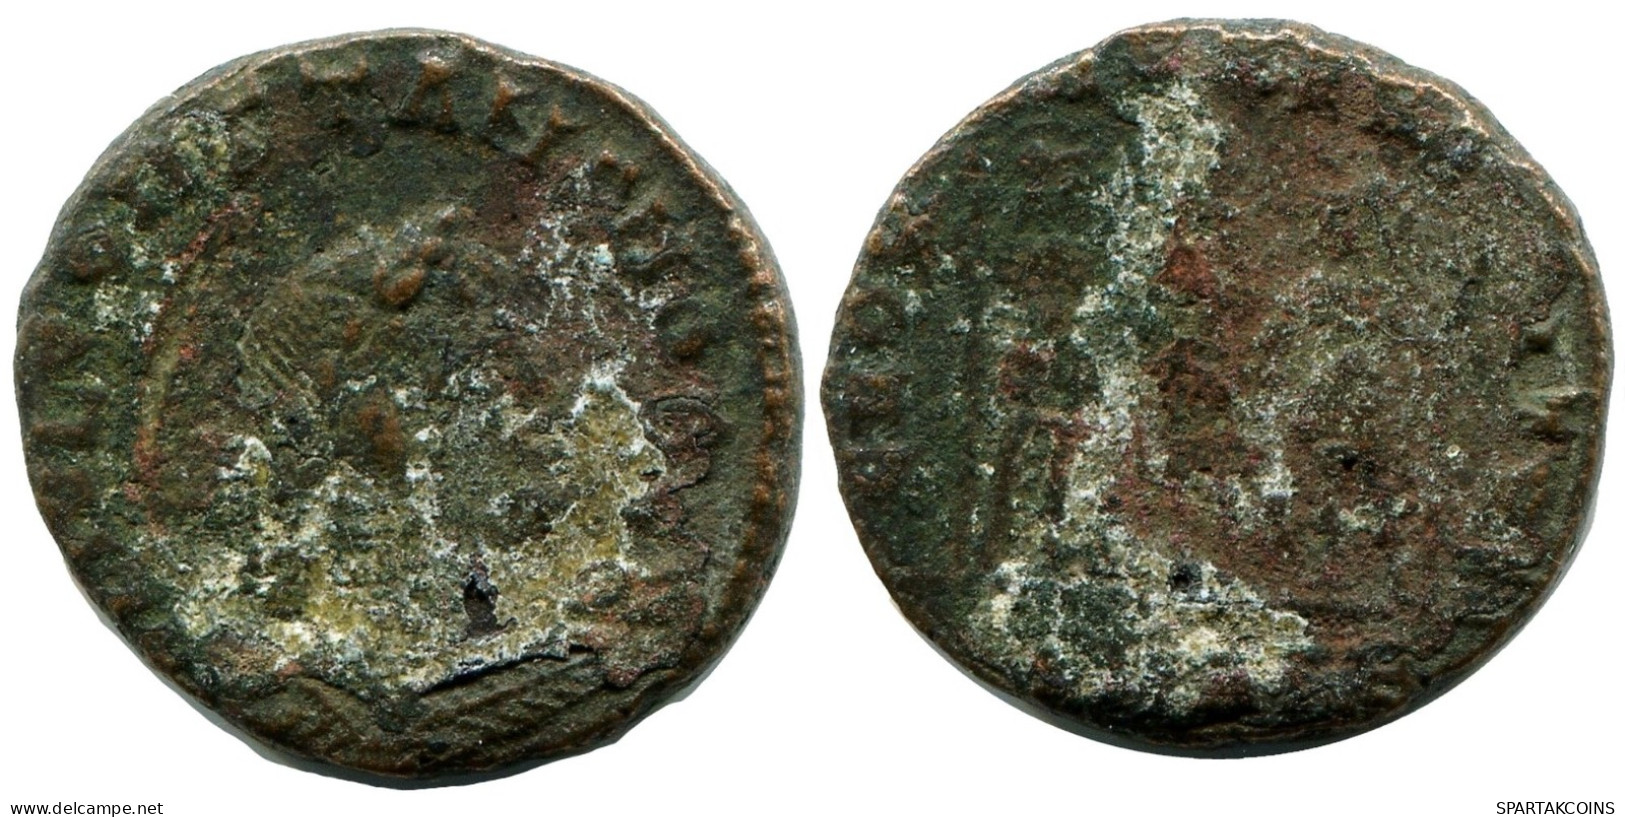 CONSTANS MINTED IN ALEKSANDRIA FROM THE ROYAL ONTARIO MUSEUM #ANC11419.14.F.A - El Imperio Christiano (307 / 363)